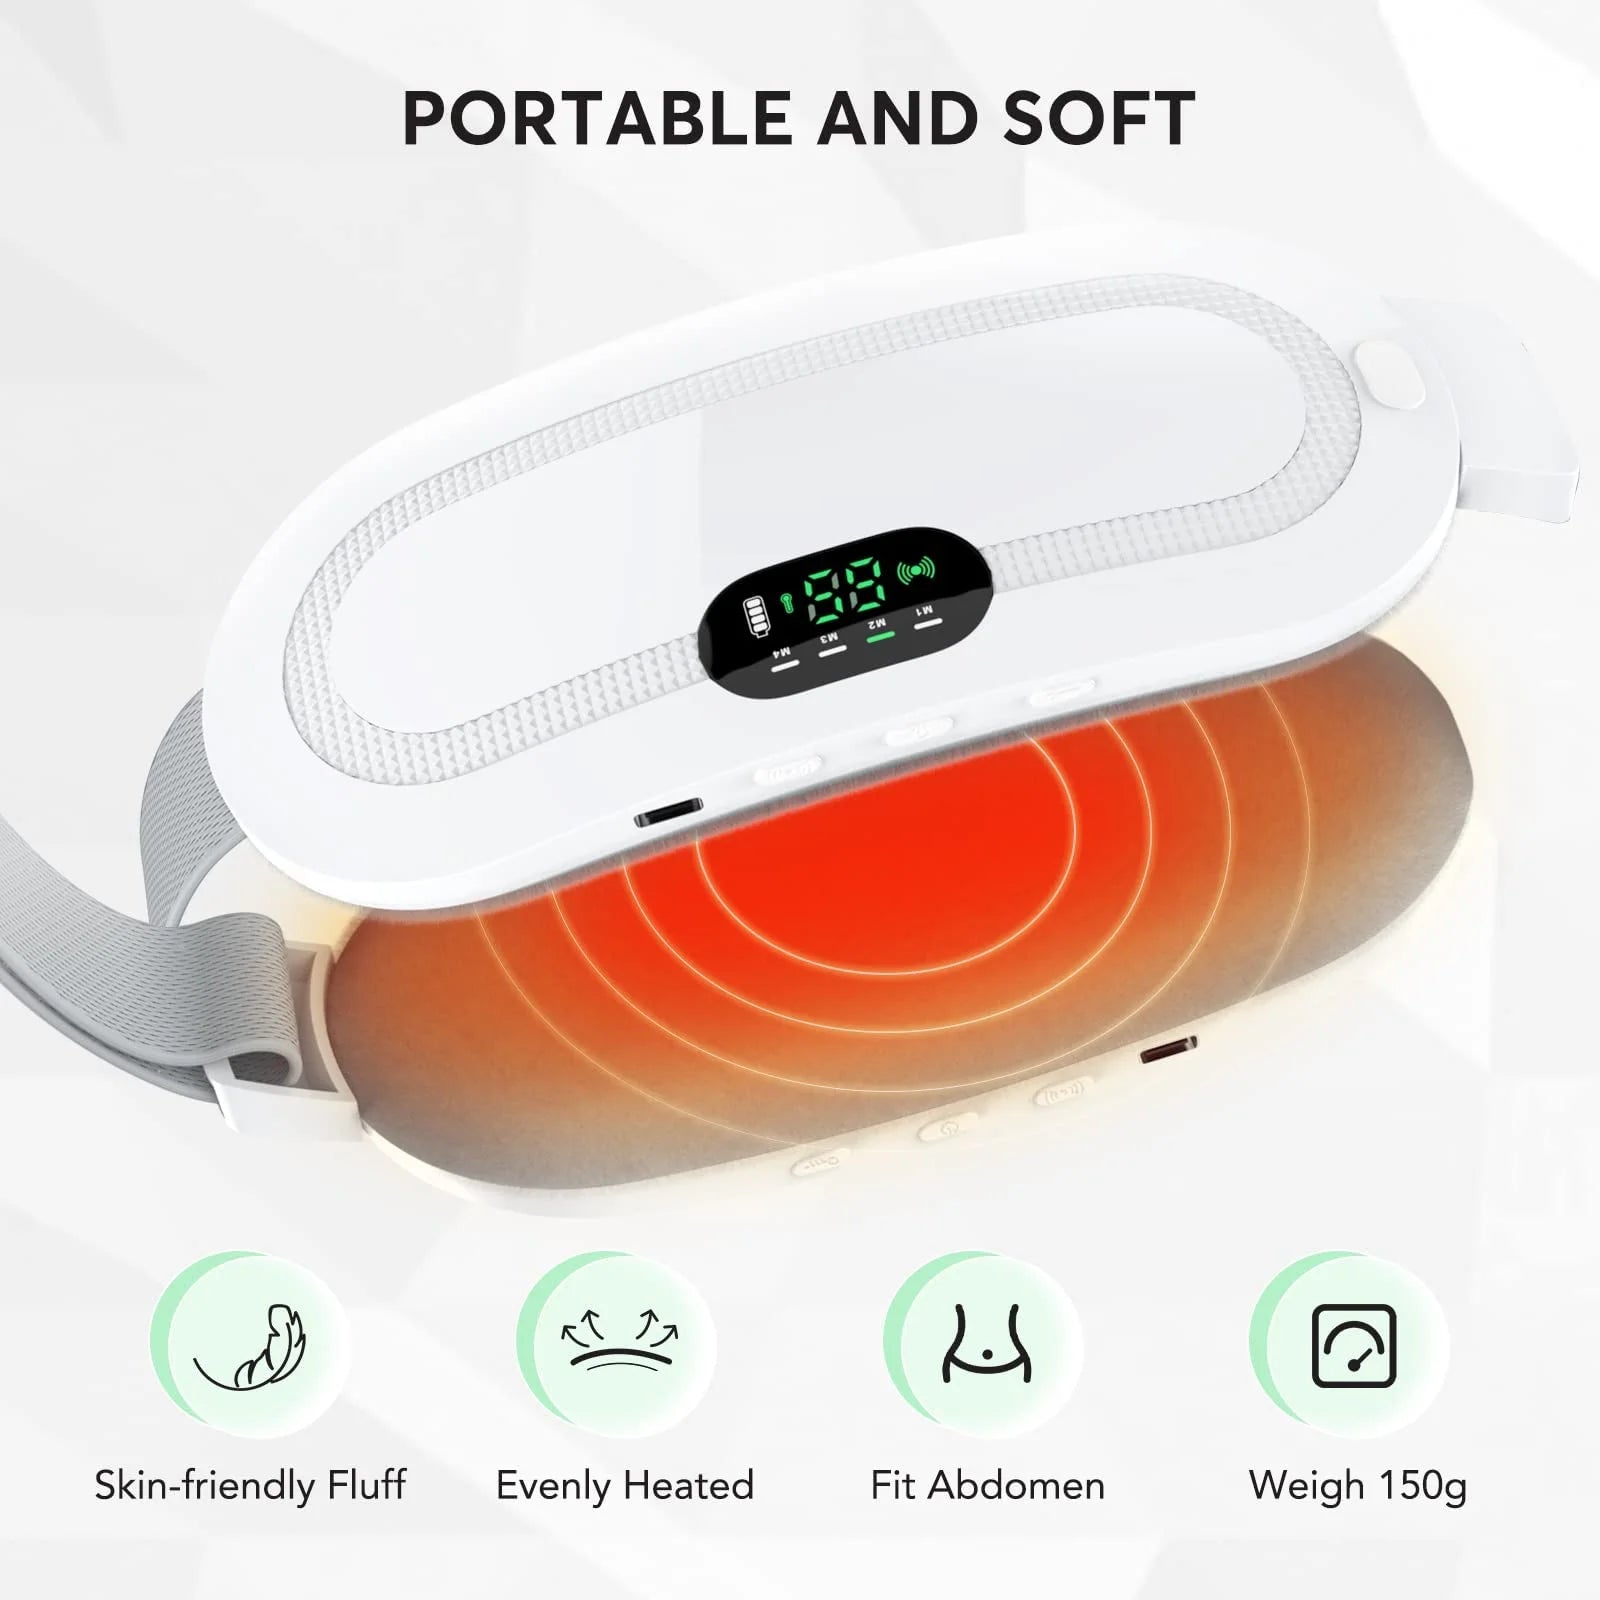 Portable Heating Pad for Period Cramps,1800Mah Cordless Period Heating Pad,3 Massage Modes Menstrual Heating Pad,Electric Rapid Fast Heating Period Cramp Heating Pad, Gifts for Women & Girl,White